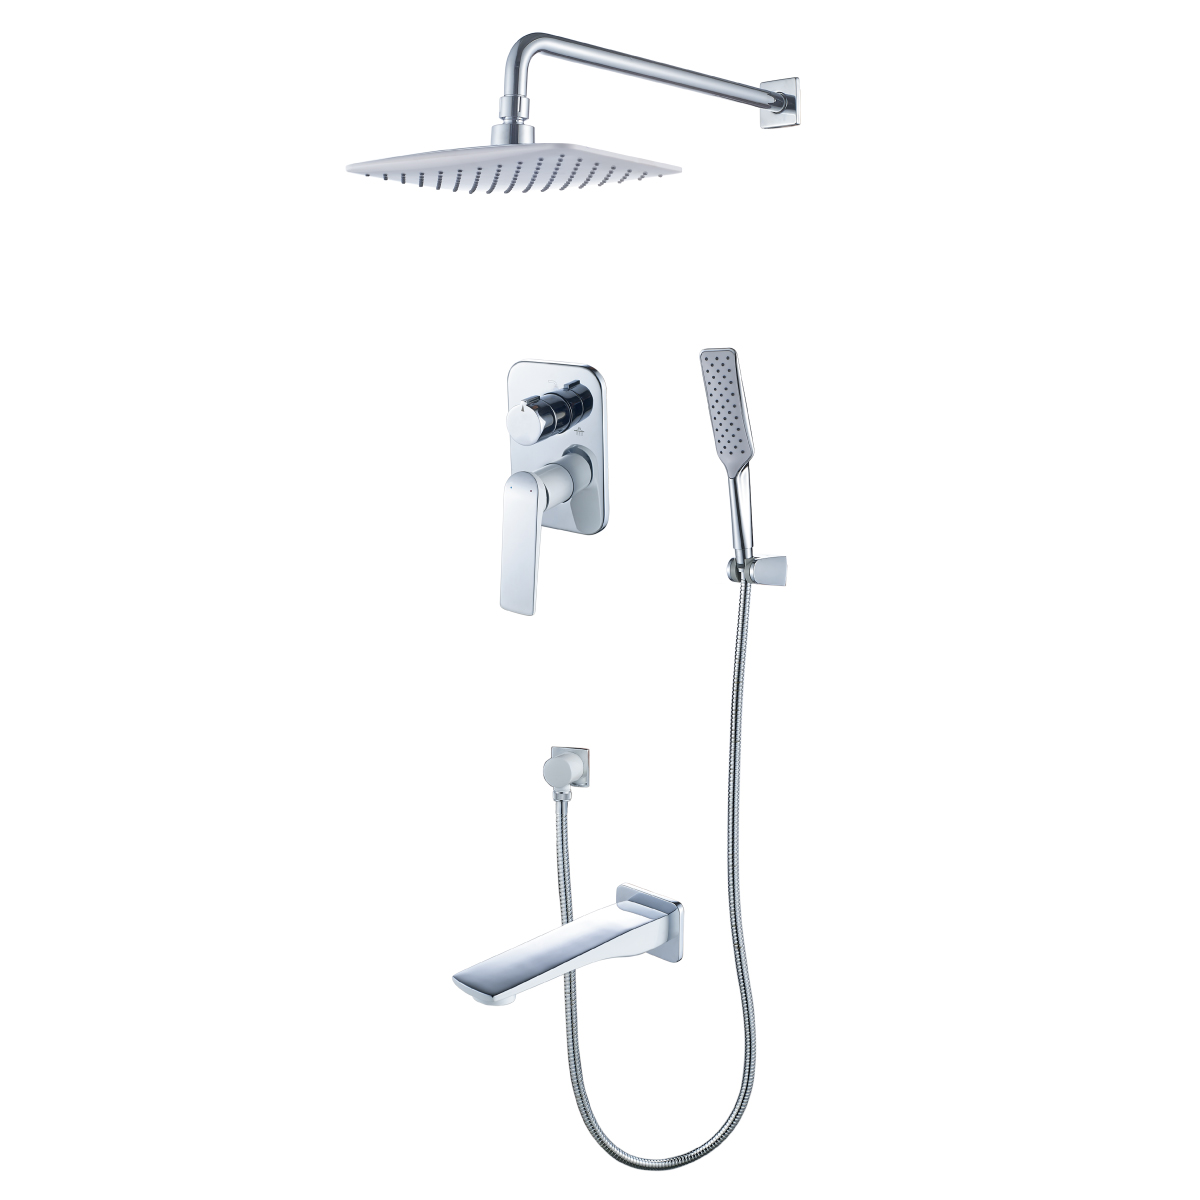 LM5922CW Built-in bath and shower faucet